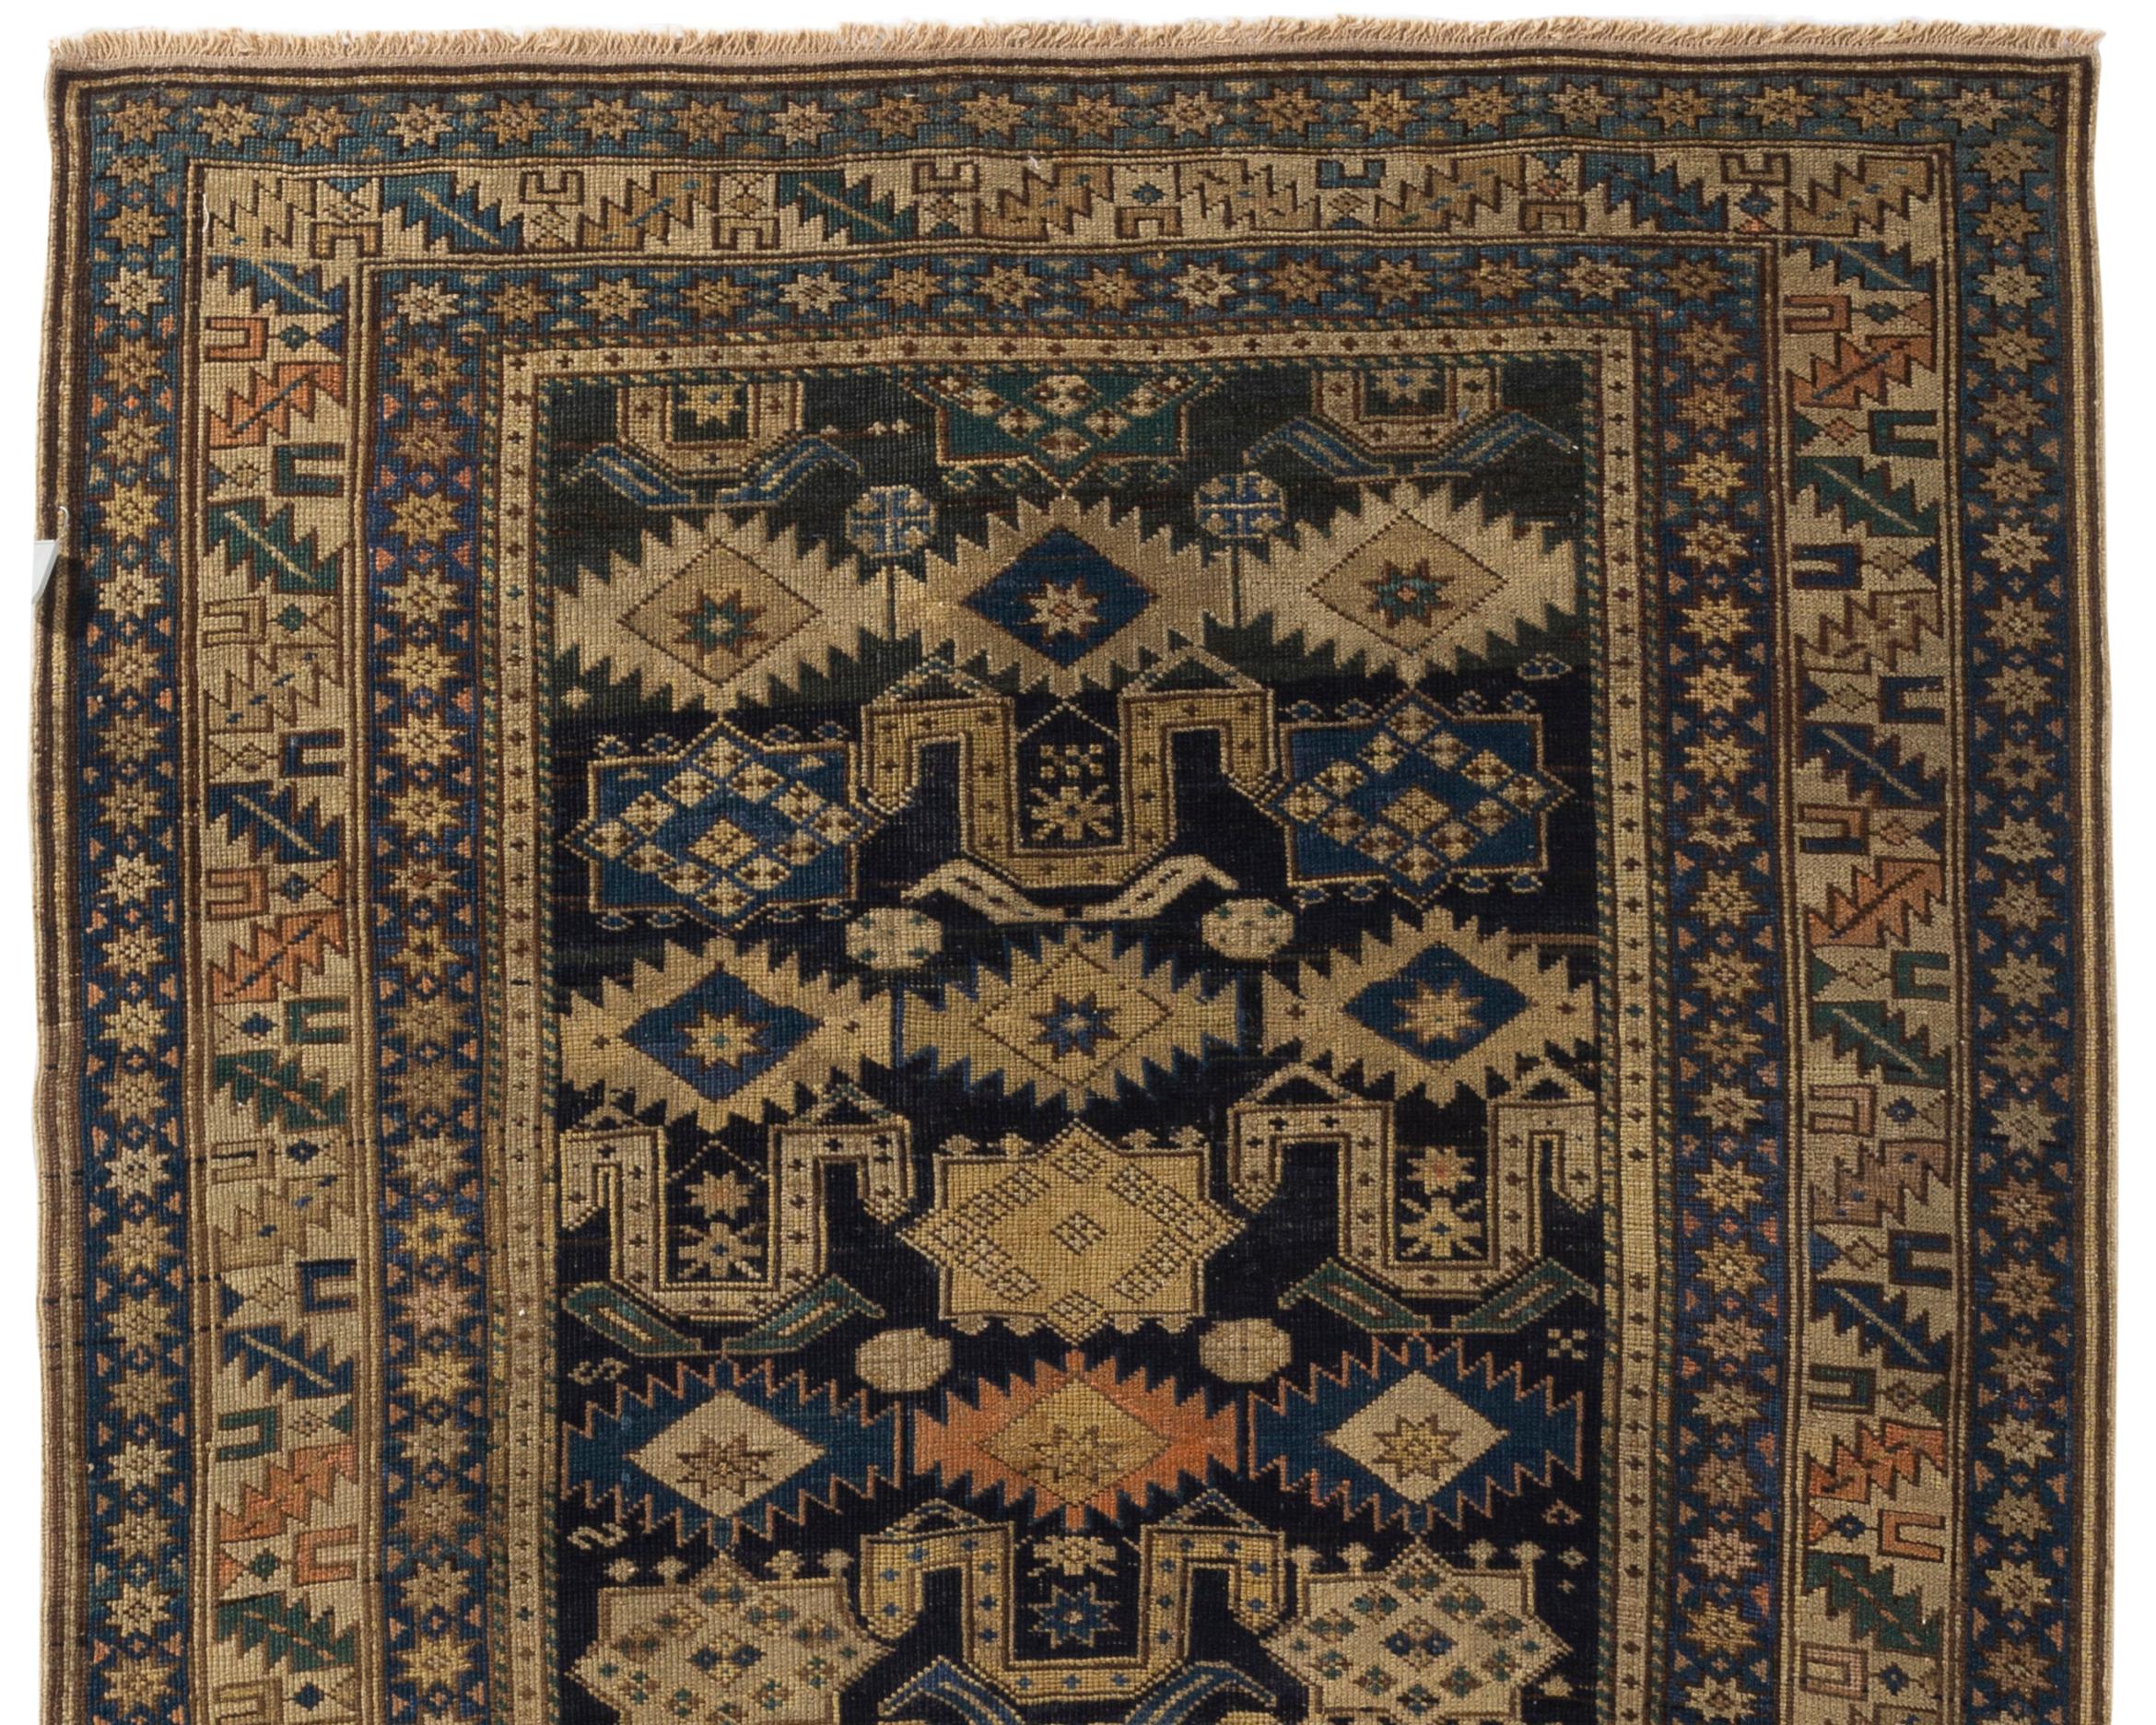 Antique Caucasian Perpedil Shirvan rug circa 1880 from the town of the same name situated to the southeast of Kuba in the Caucasian region of Daghestan.. Featuring the distinctive ram's Horn design associated with rugs from this area on a dark blue